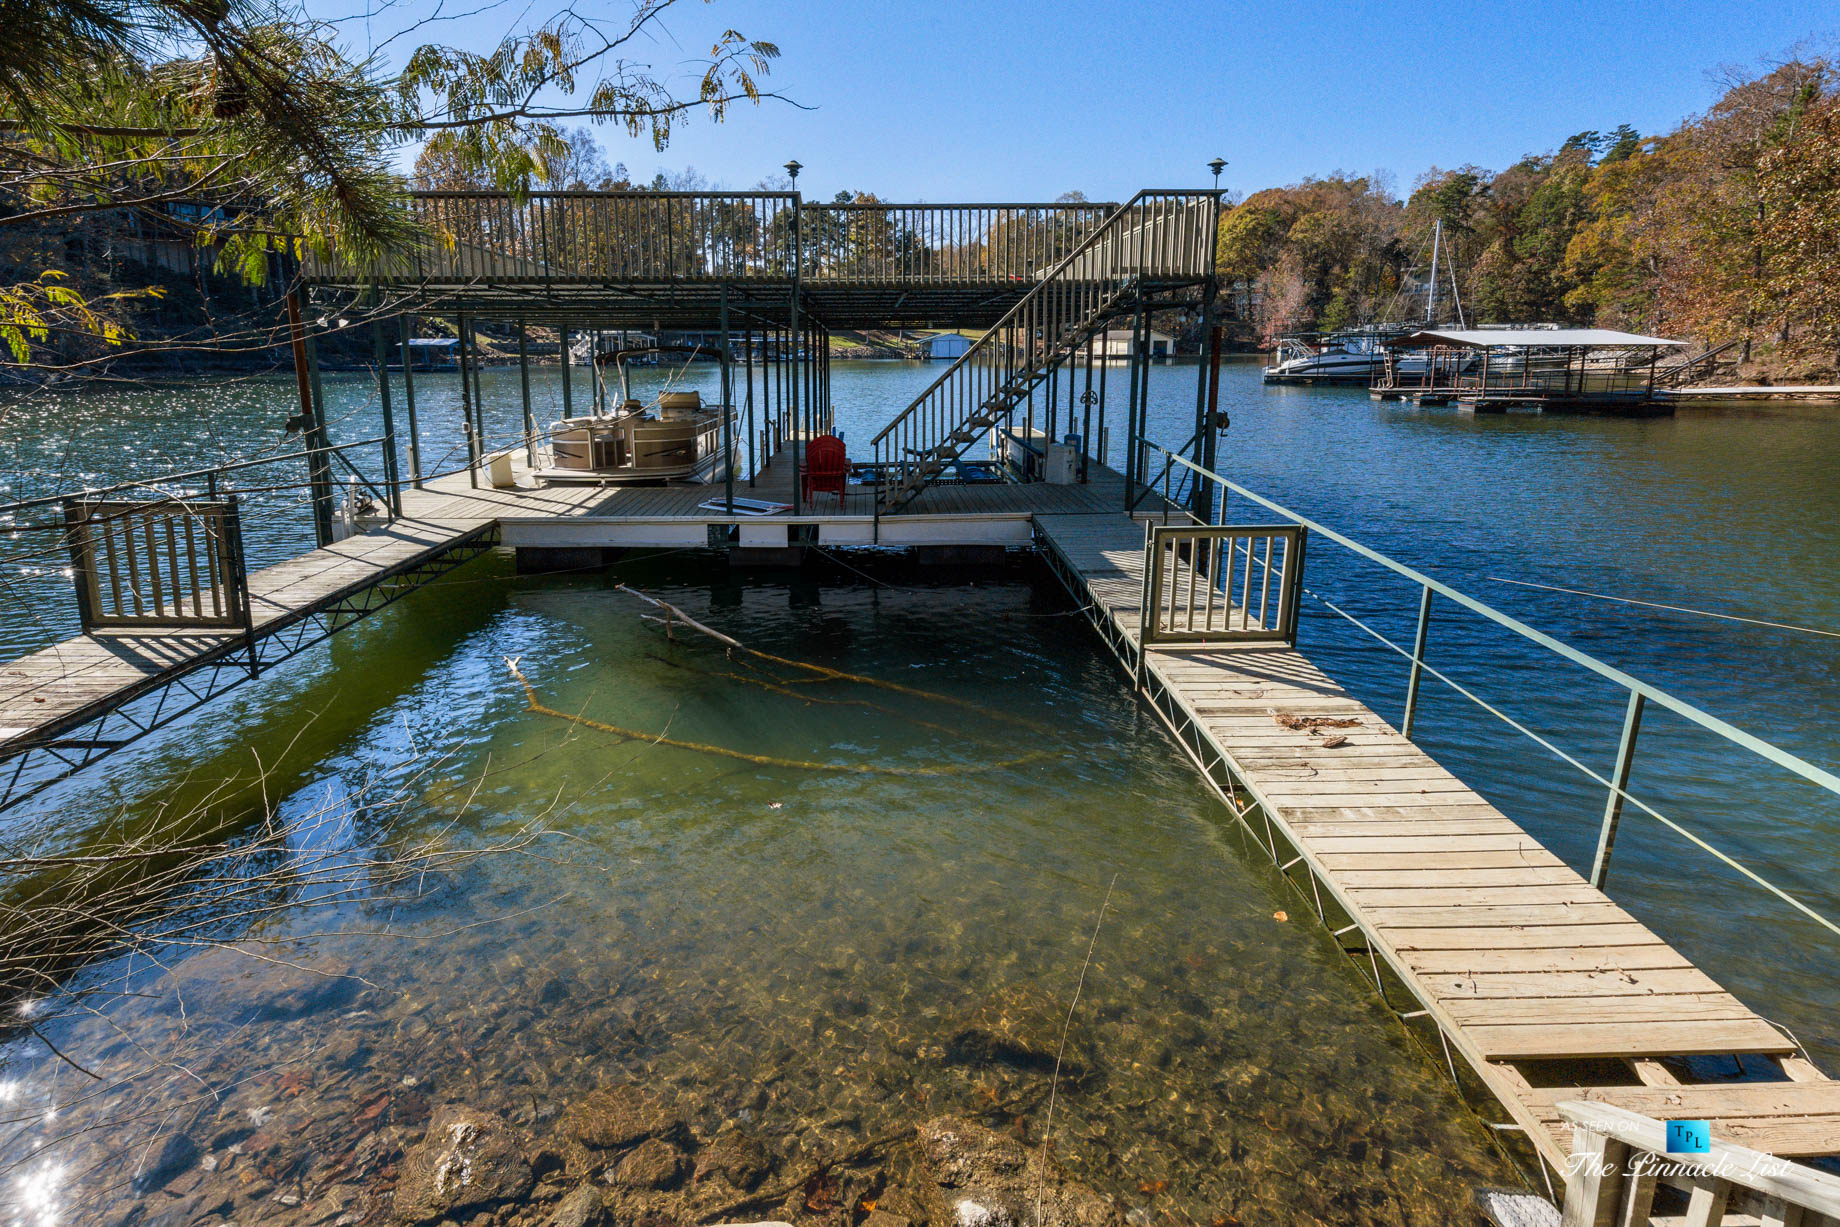 7860 Chestnut Hill Rd, Cumming, GA, USA - Private Dock with Sundeck - Luxury Real Estate - Lake Lanier Mid-Century Modern Stone Home